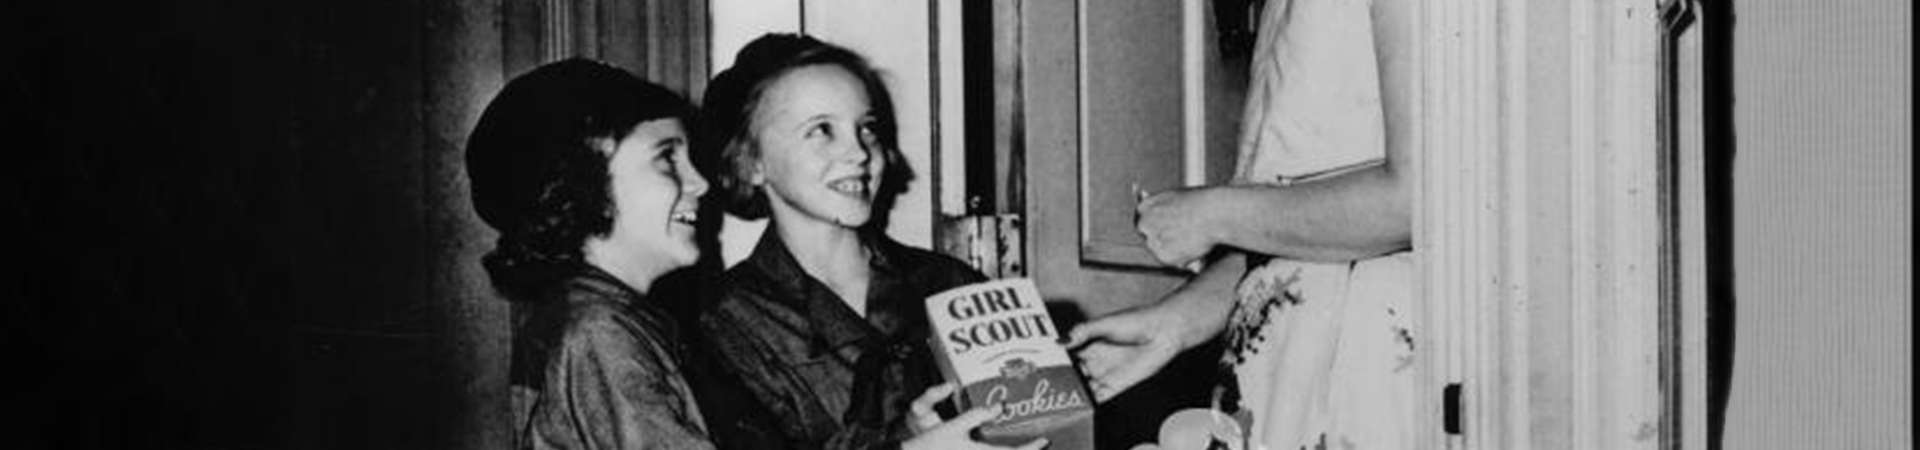  vintage photo of two girls selling girl scout cookies 